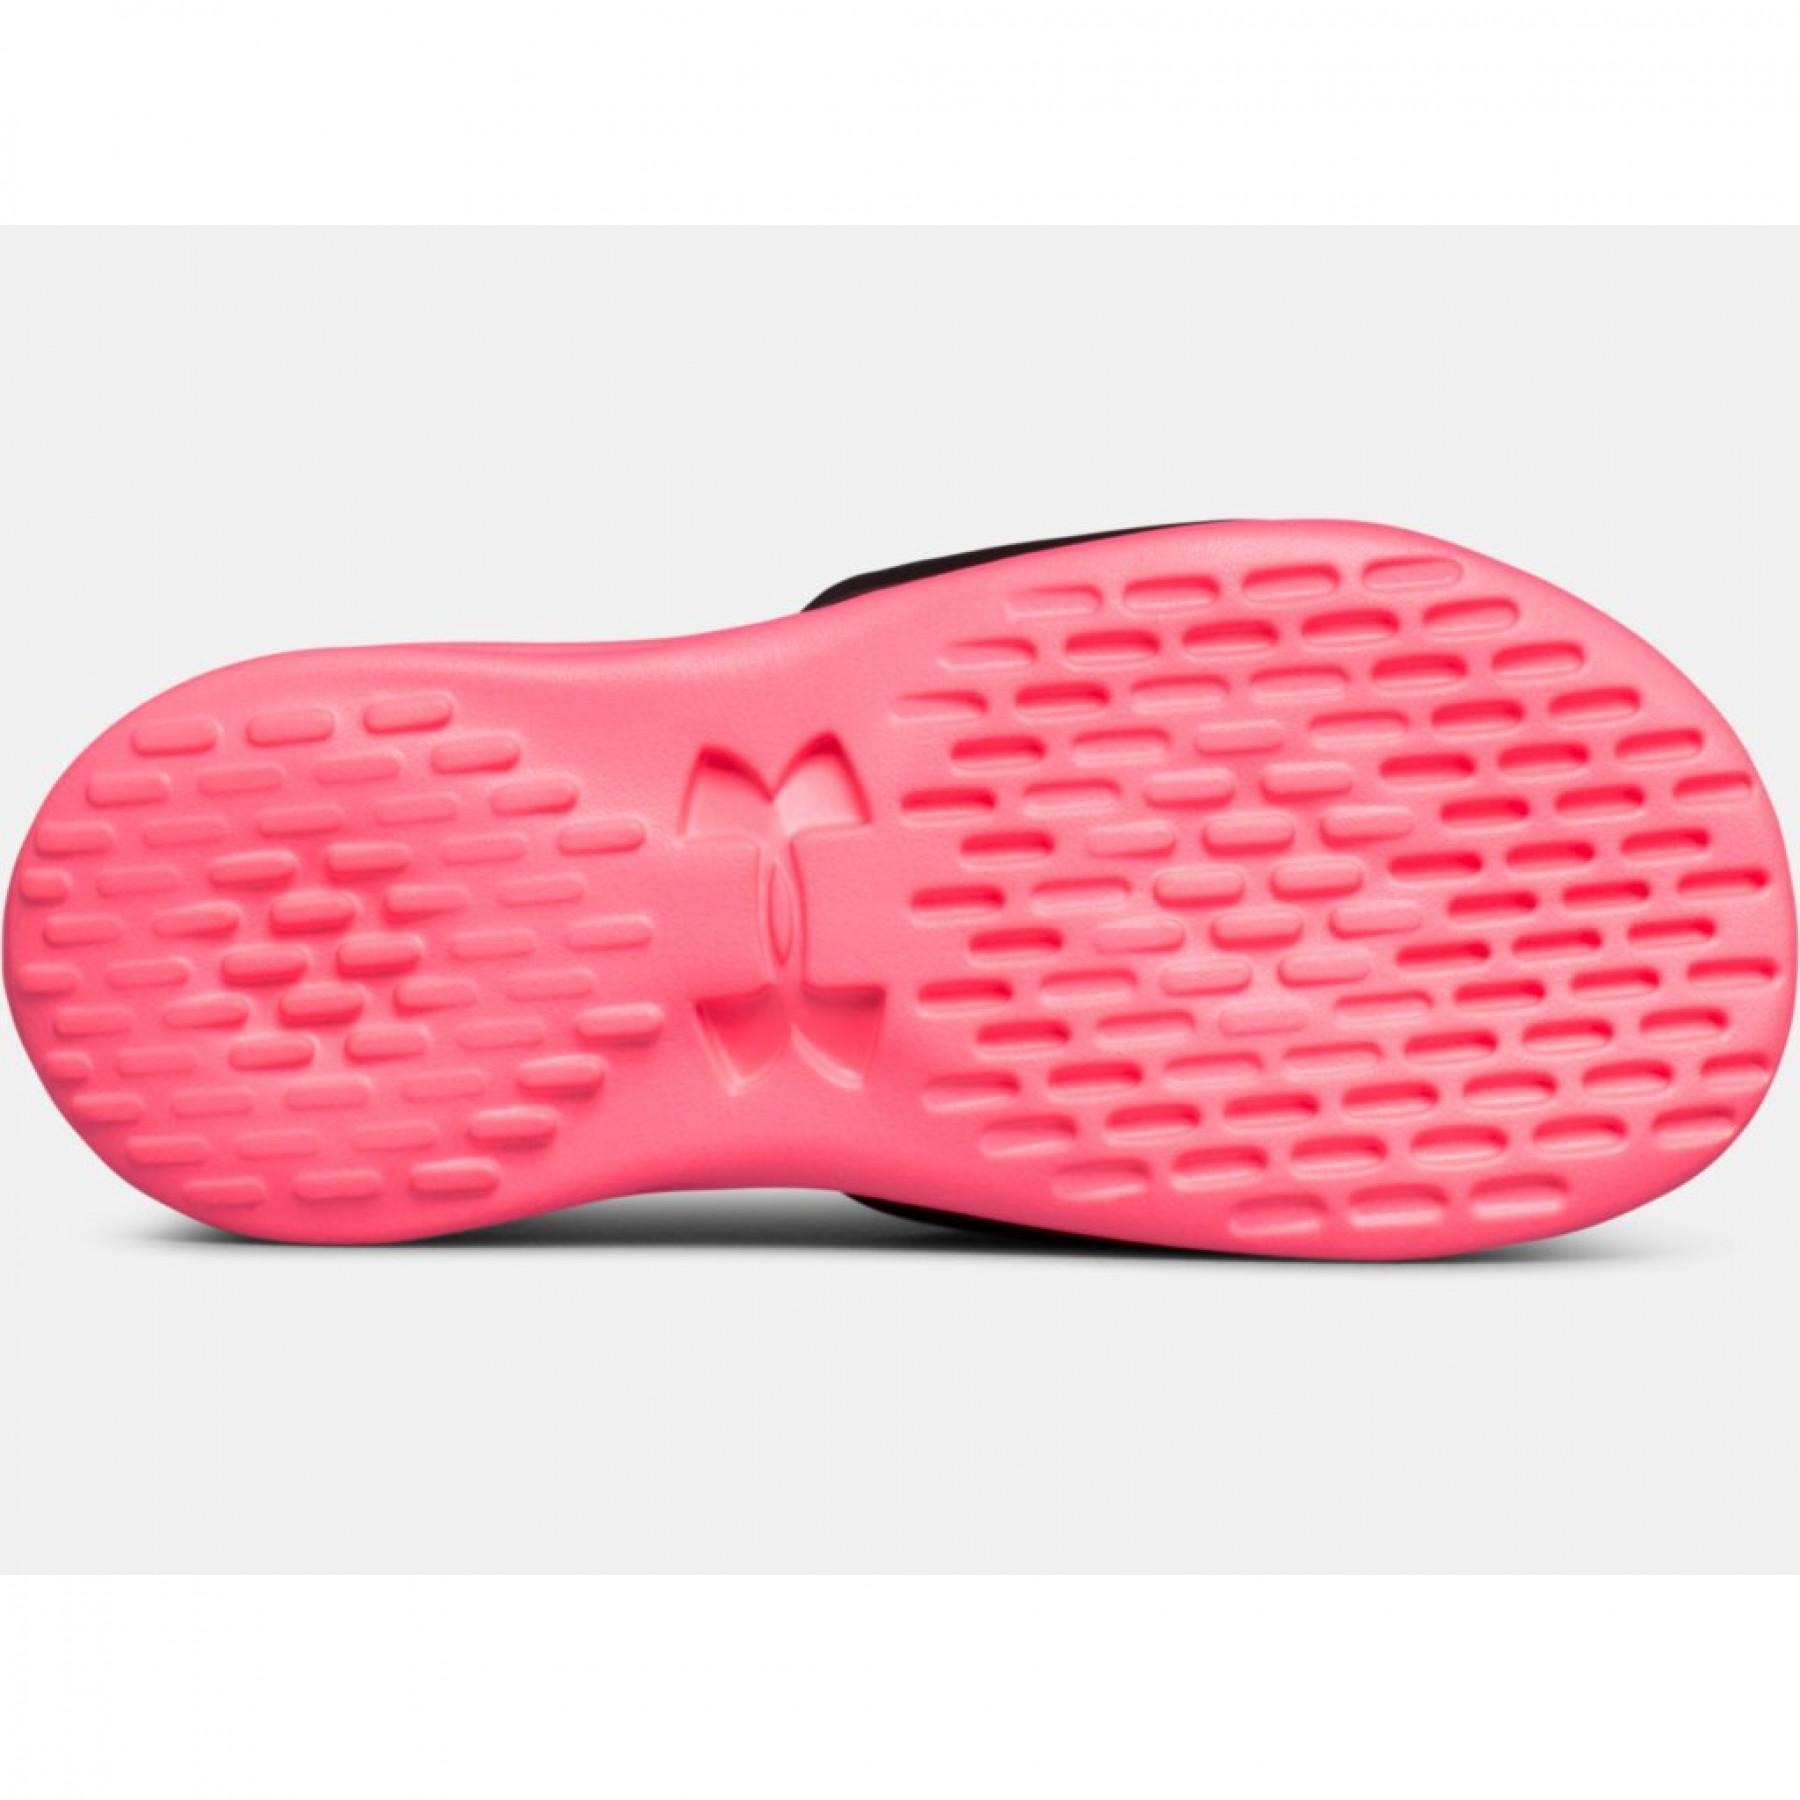 Girl's flip-flops Under Armour Playmaker Fixed Strap